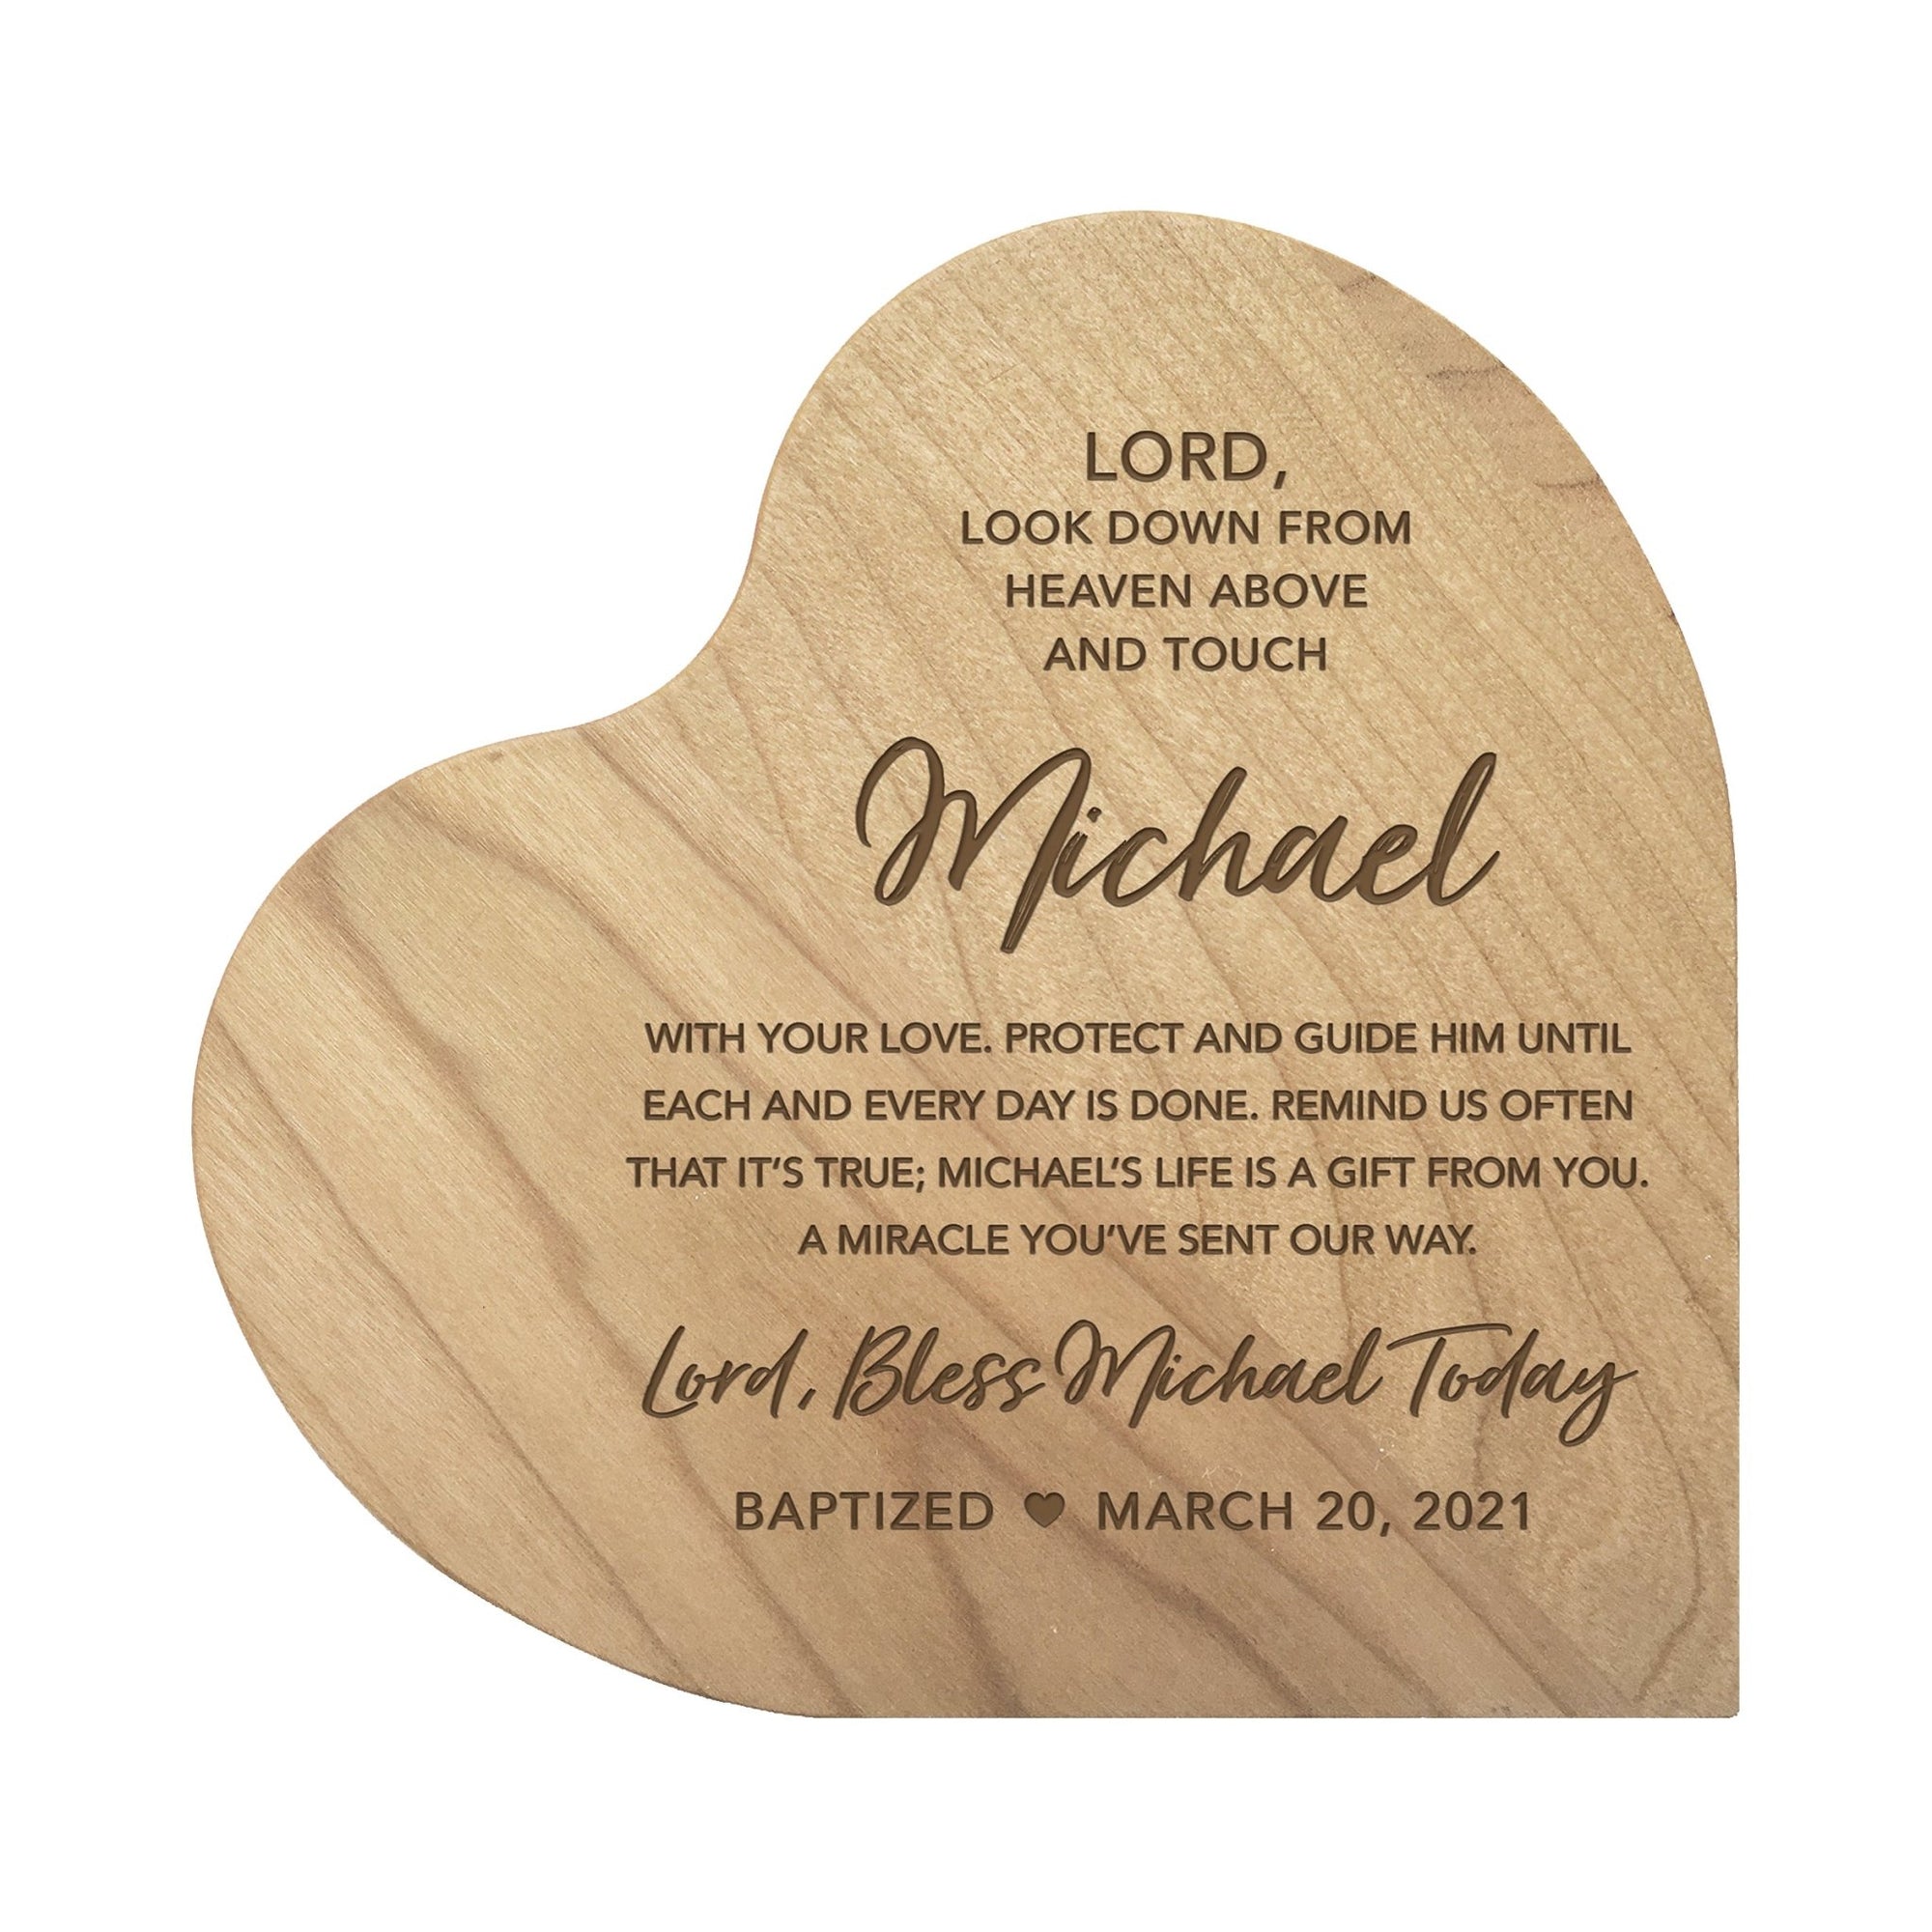 Personalized Baptism Solid Wood Heart Decoration With Inspirational Verse Keepsake Gift 5x5.25 - Lord Look Down - LifeSong Milestones